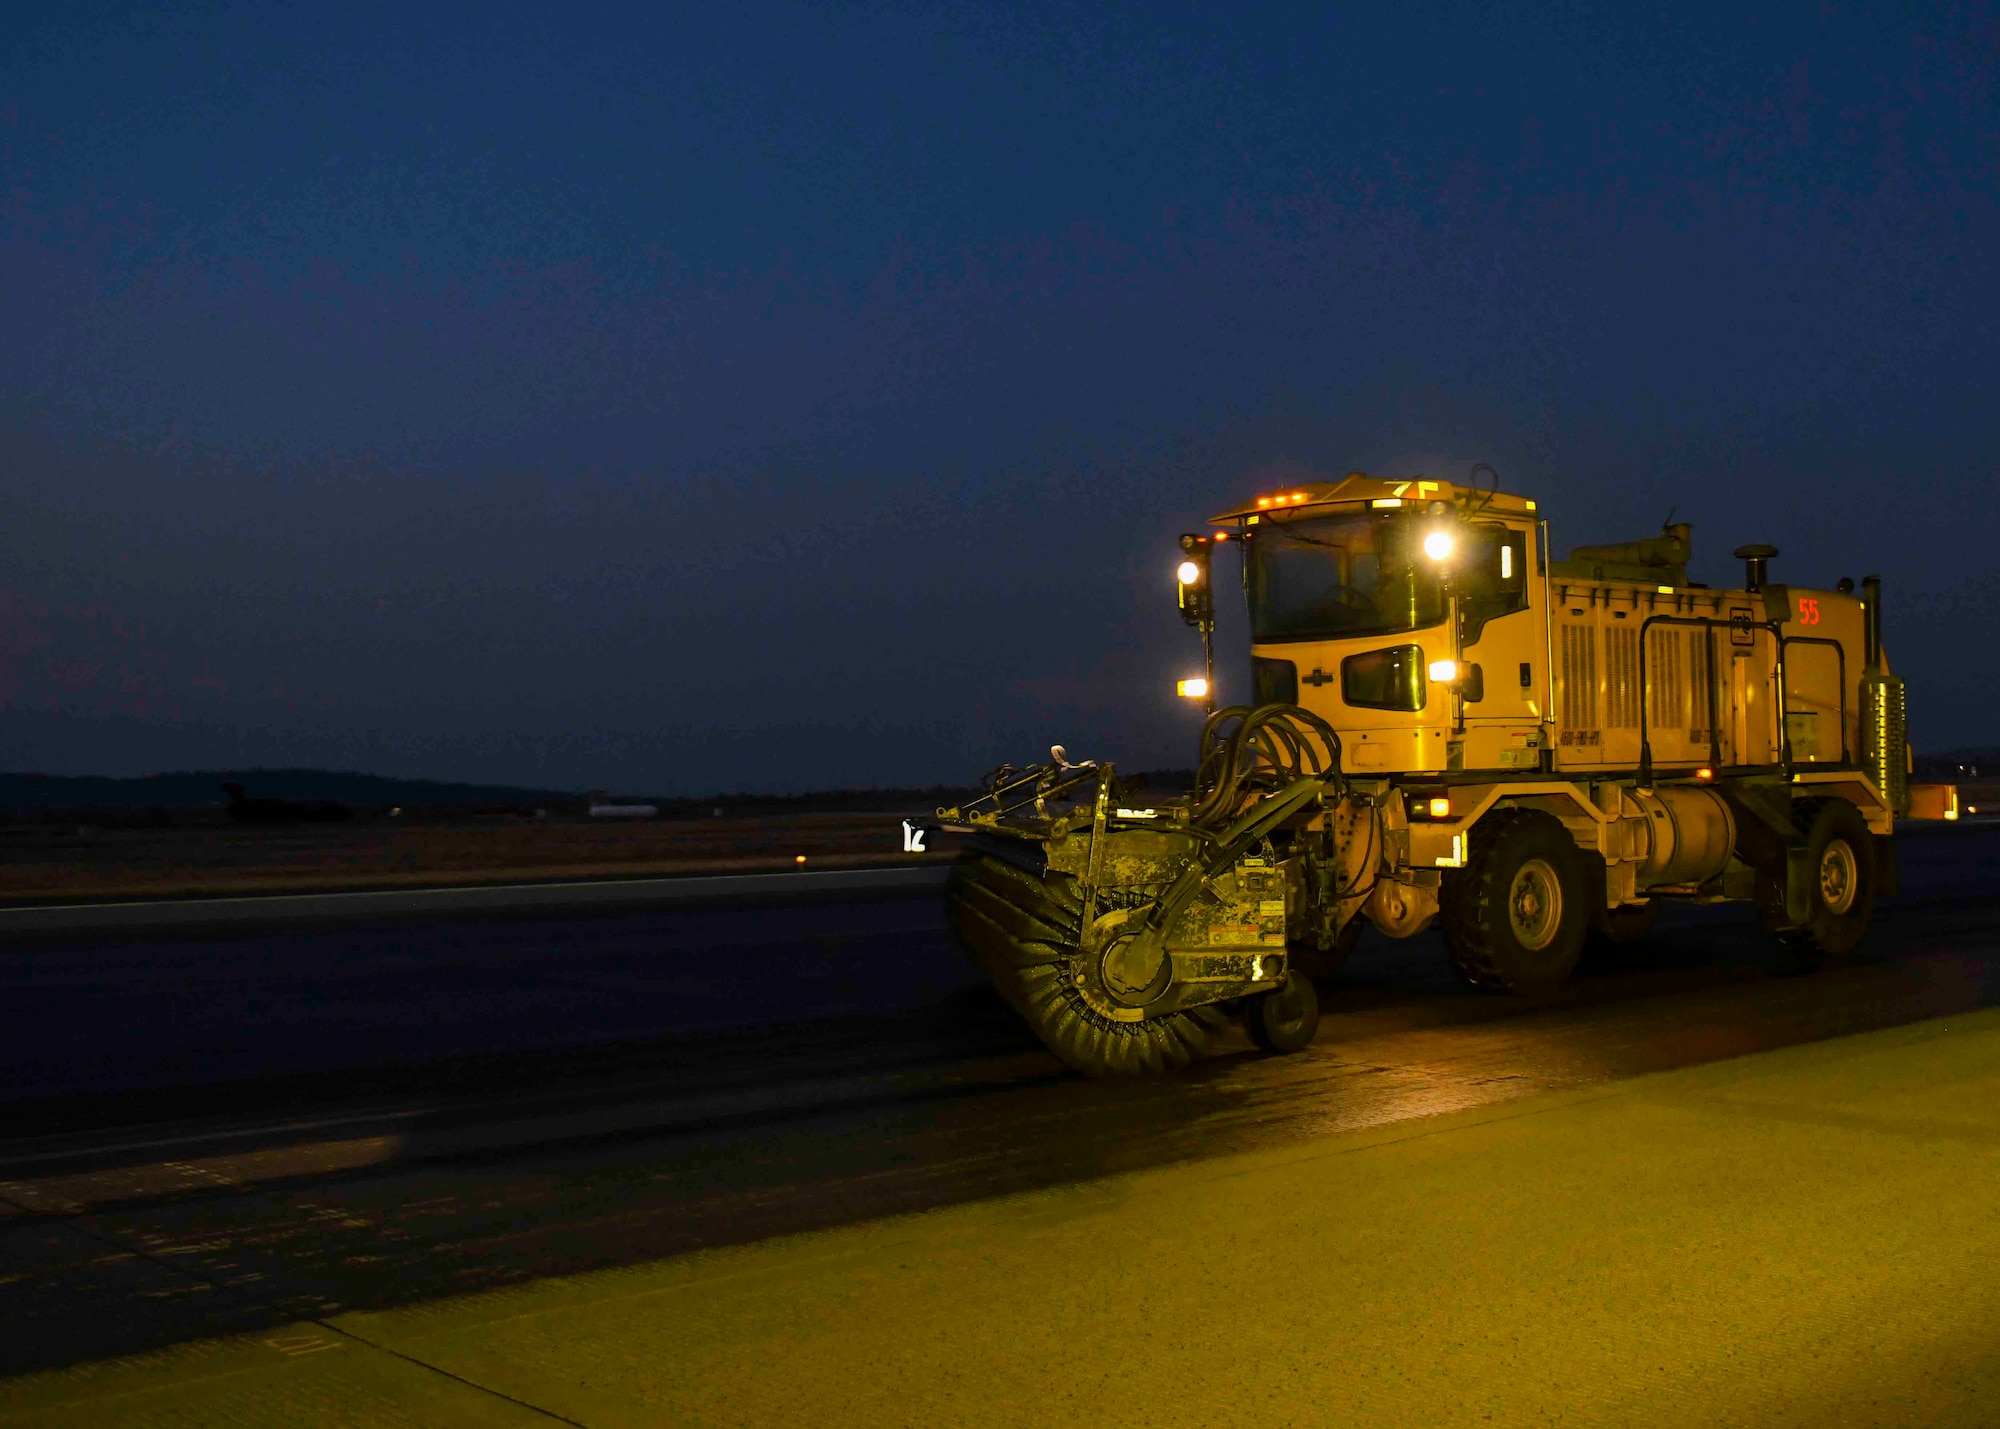 A 92nd Civil Engineering Squadron Airman operates heavy snow removal equipment to scrub the flightline as part of flightline rubber removal at Fairchild Air Force Base, Washington, Oct, 3, 2020. 92nd CES Airmen train on the flightline using the snow removal equipment during rubber removal to prepare for upcoming winter weather. (U.S. Air Force photo by Airman 1st Class Kiaundra Miller)_